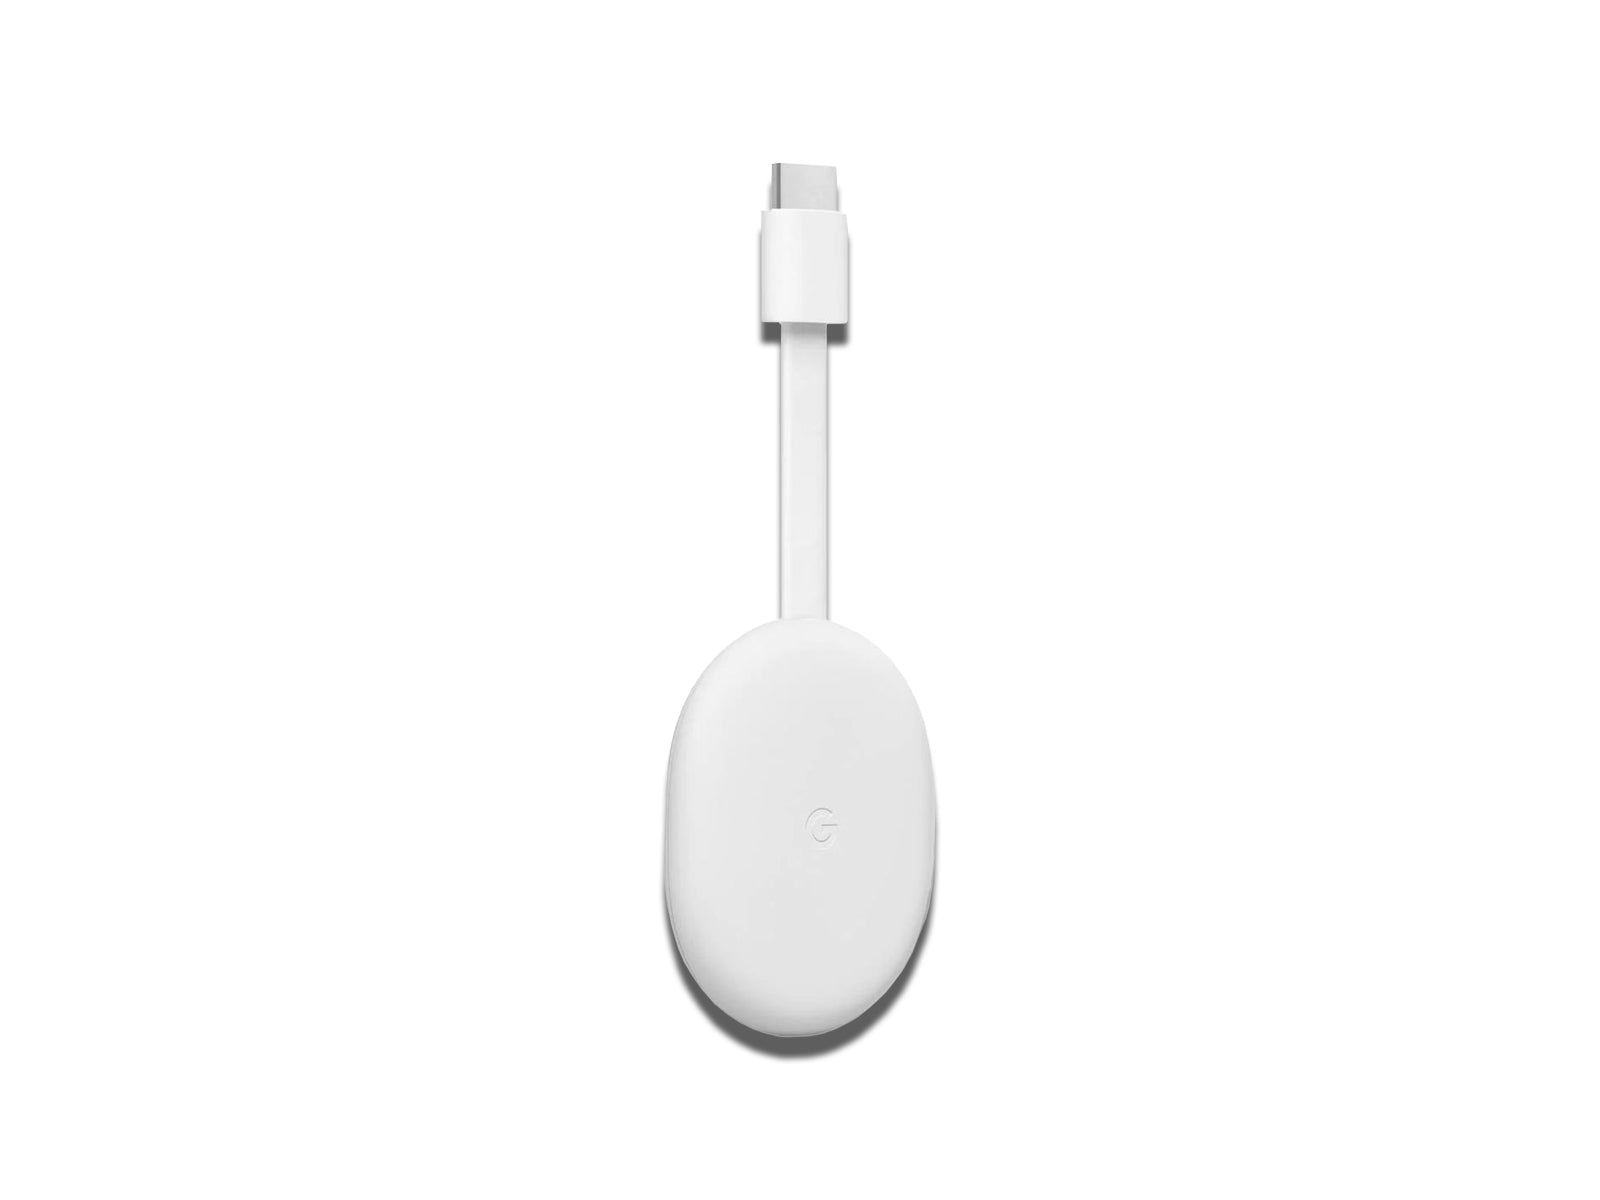 Left Back Side View of The Chromecast on The White Background